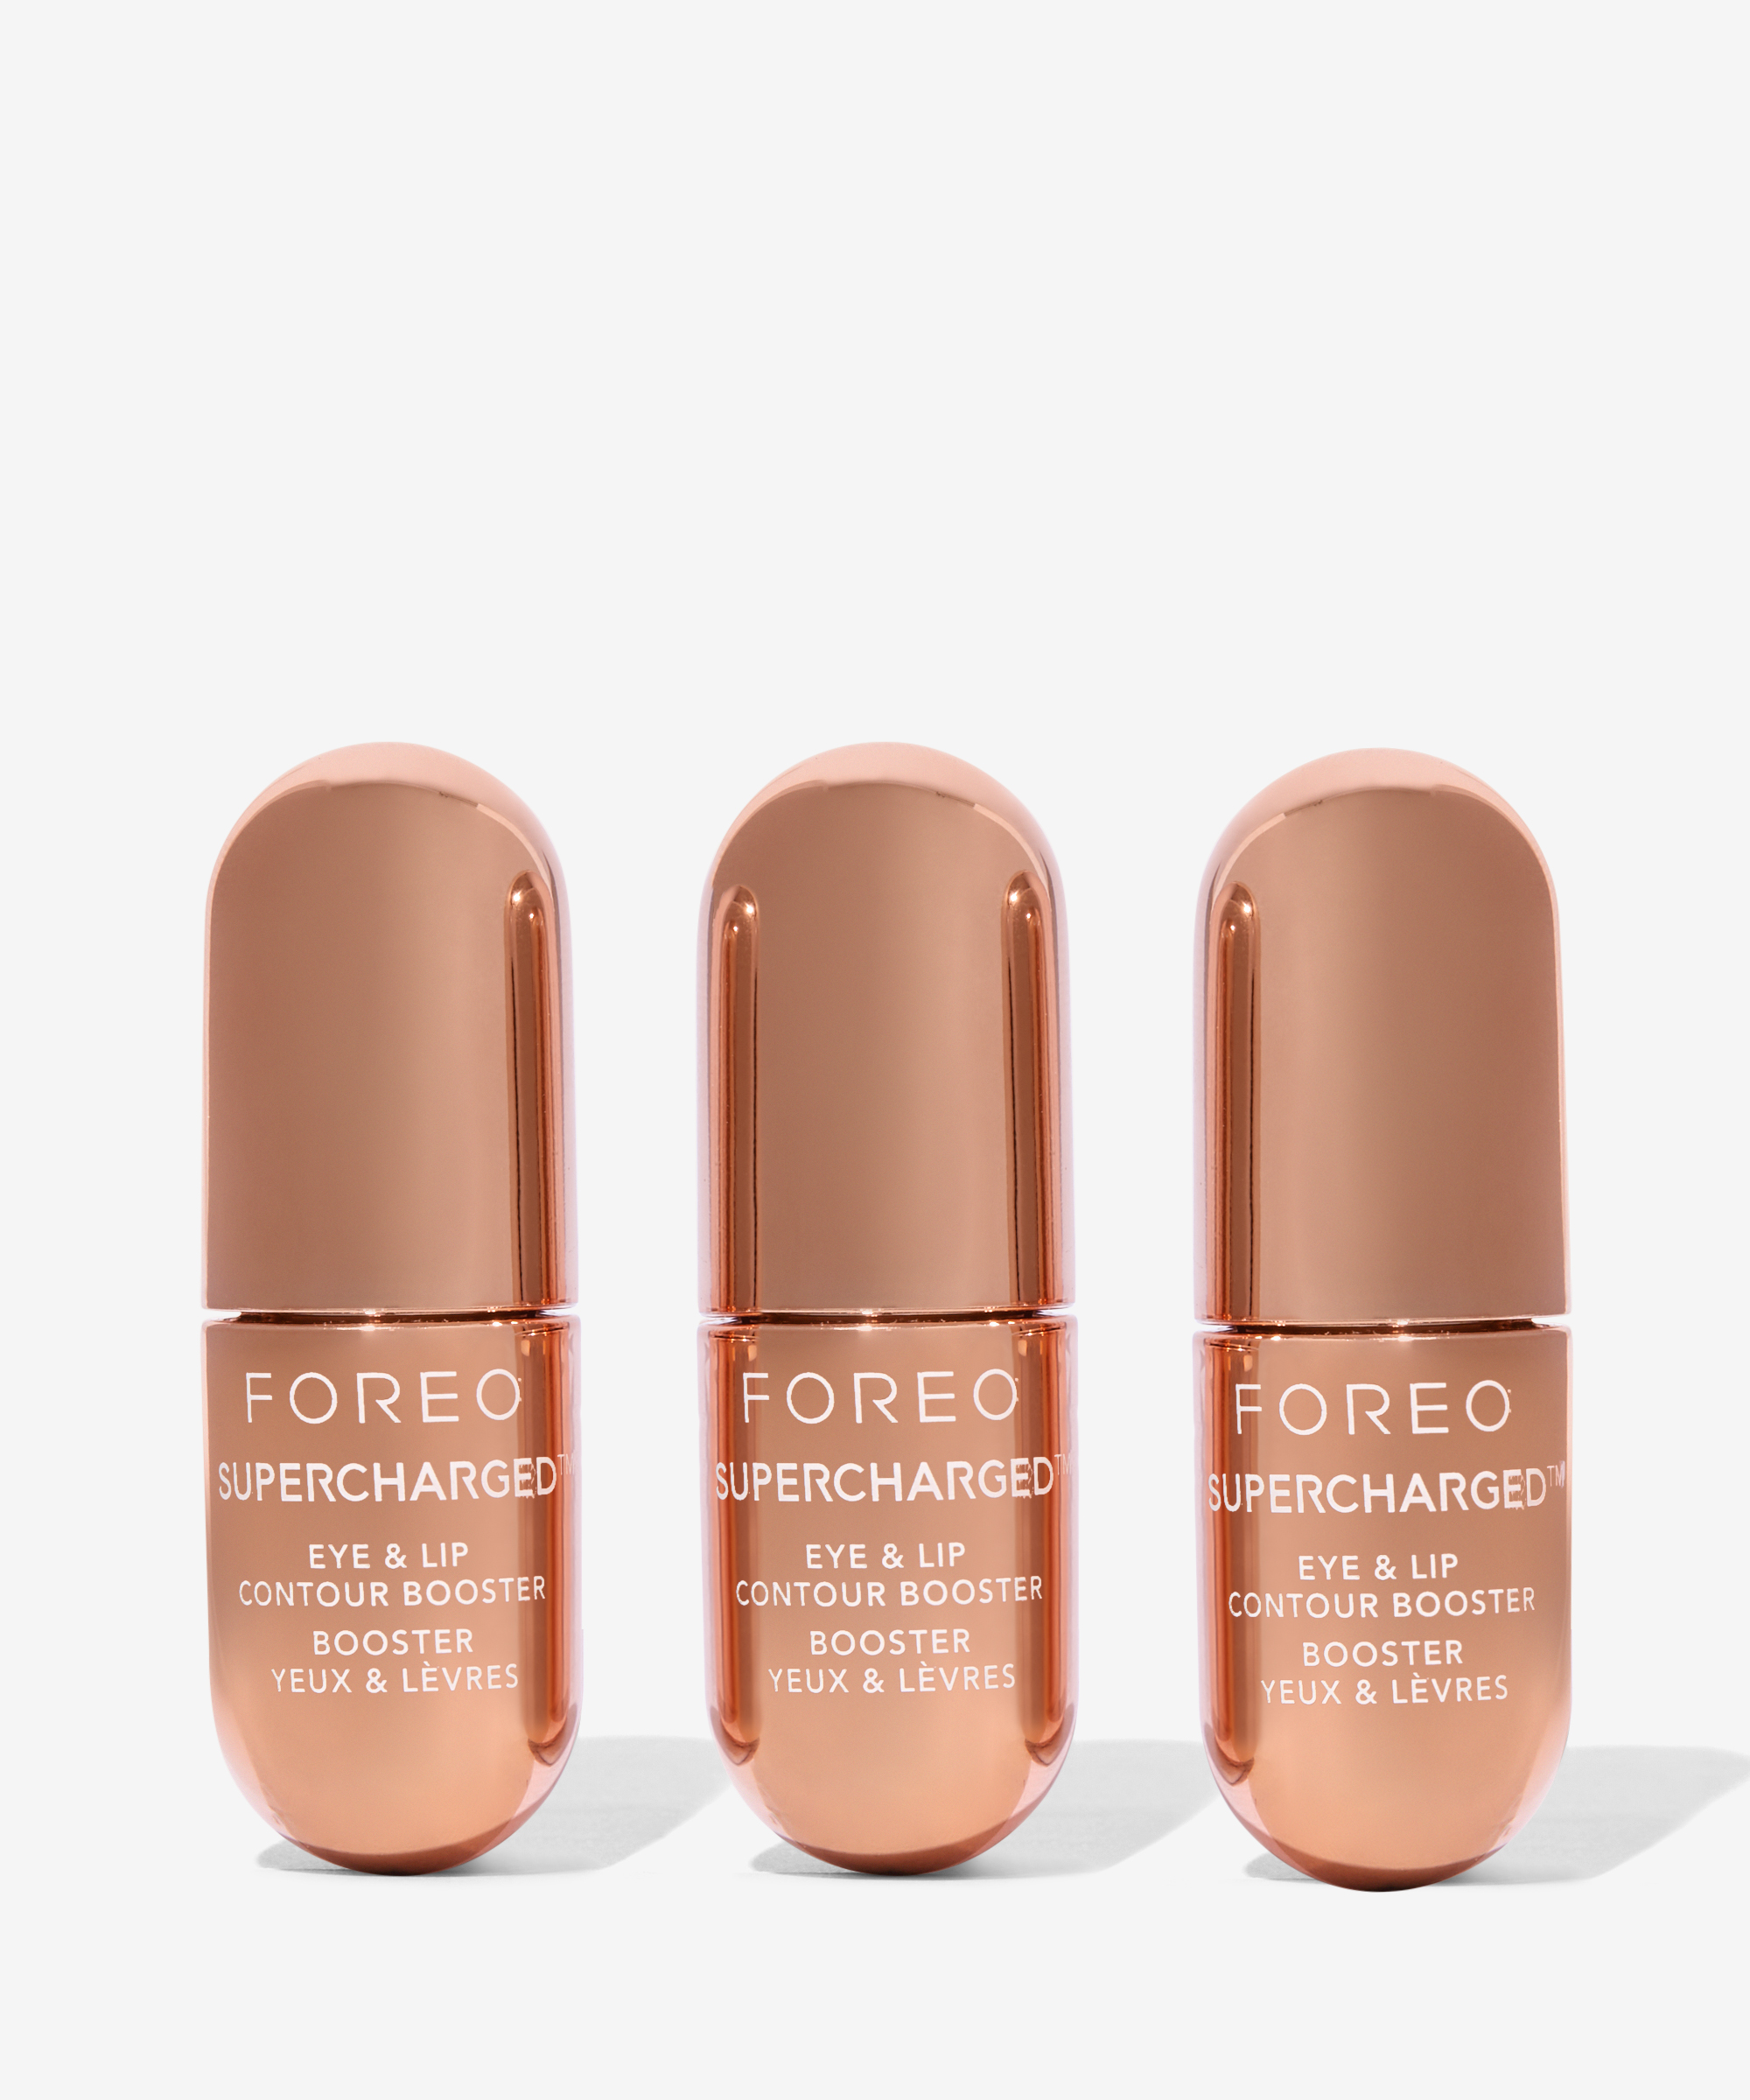 Foreo Supercharged BAY Eye Lip at BEAUTY Booster Contour 